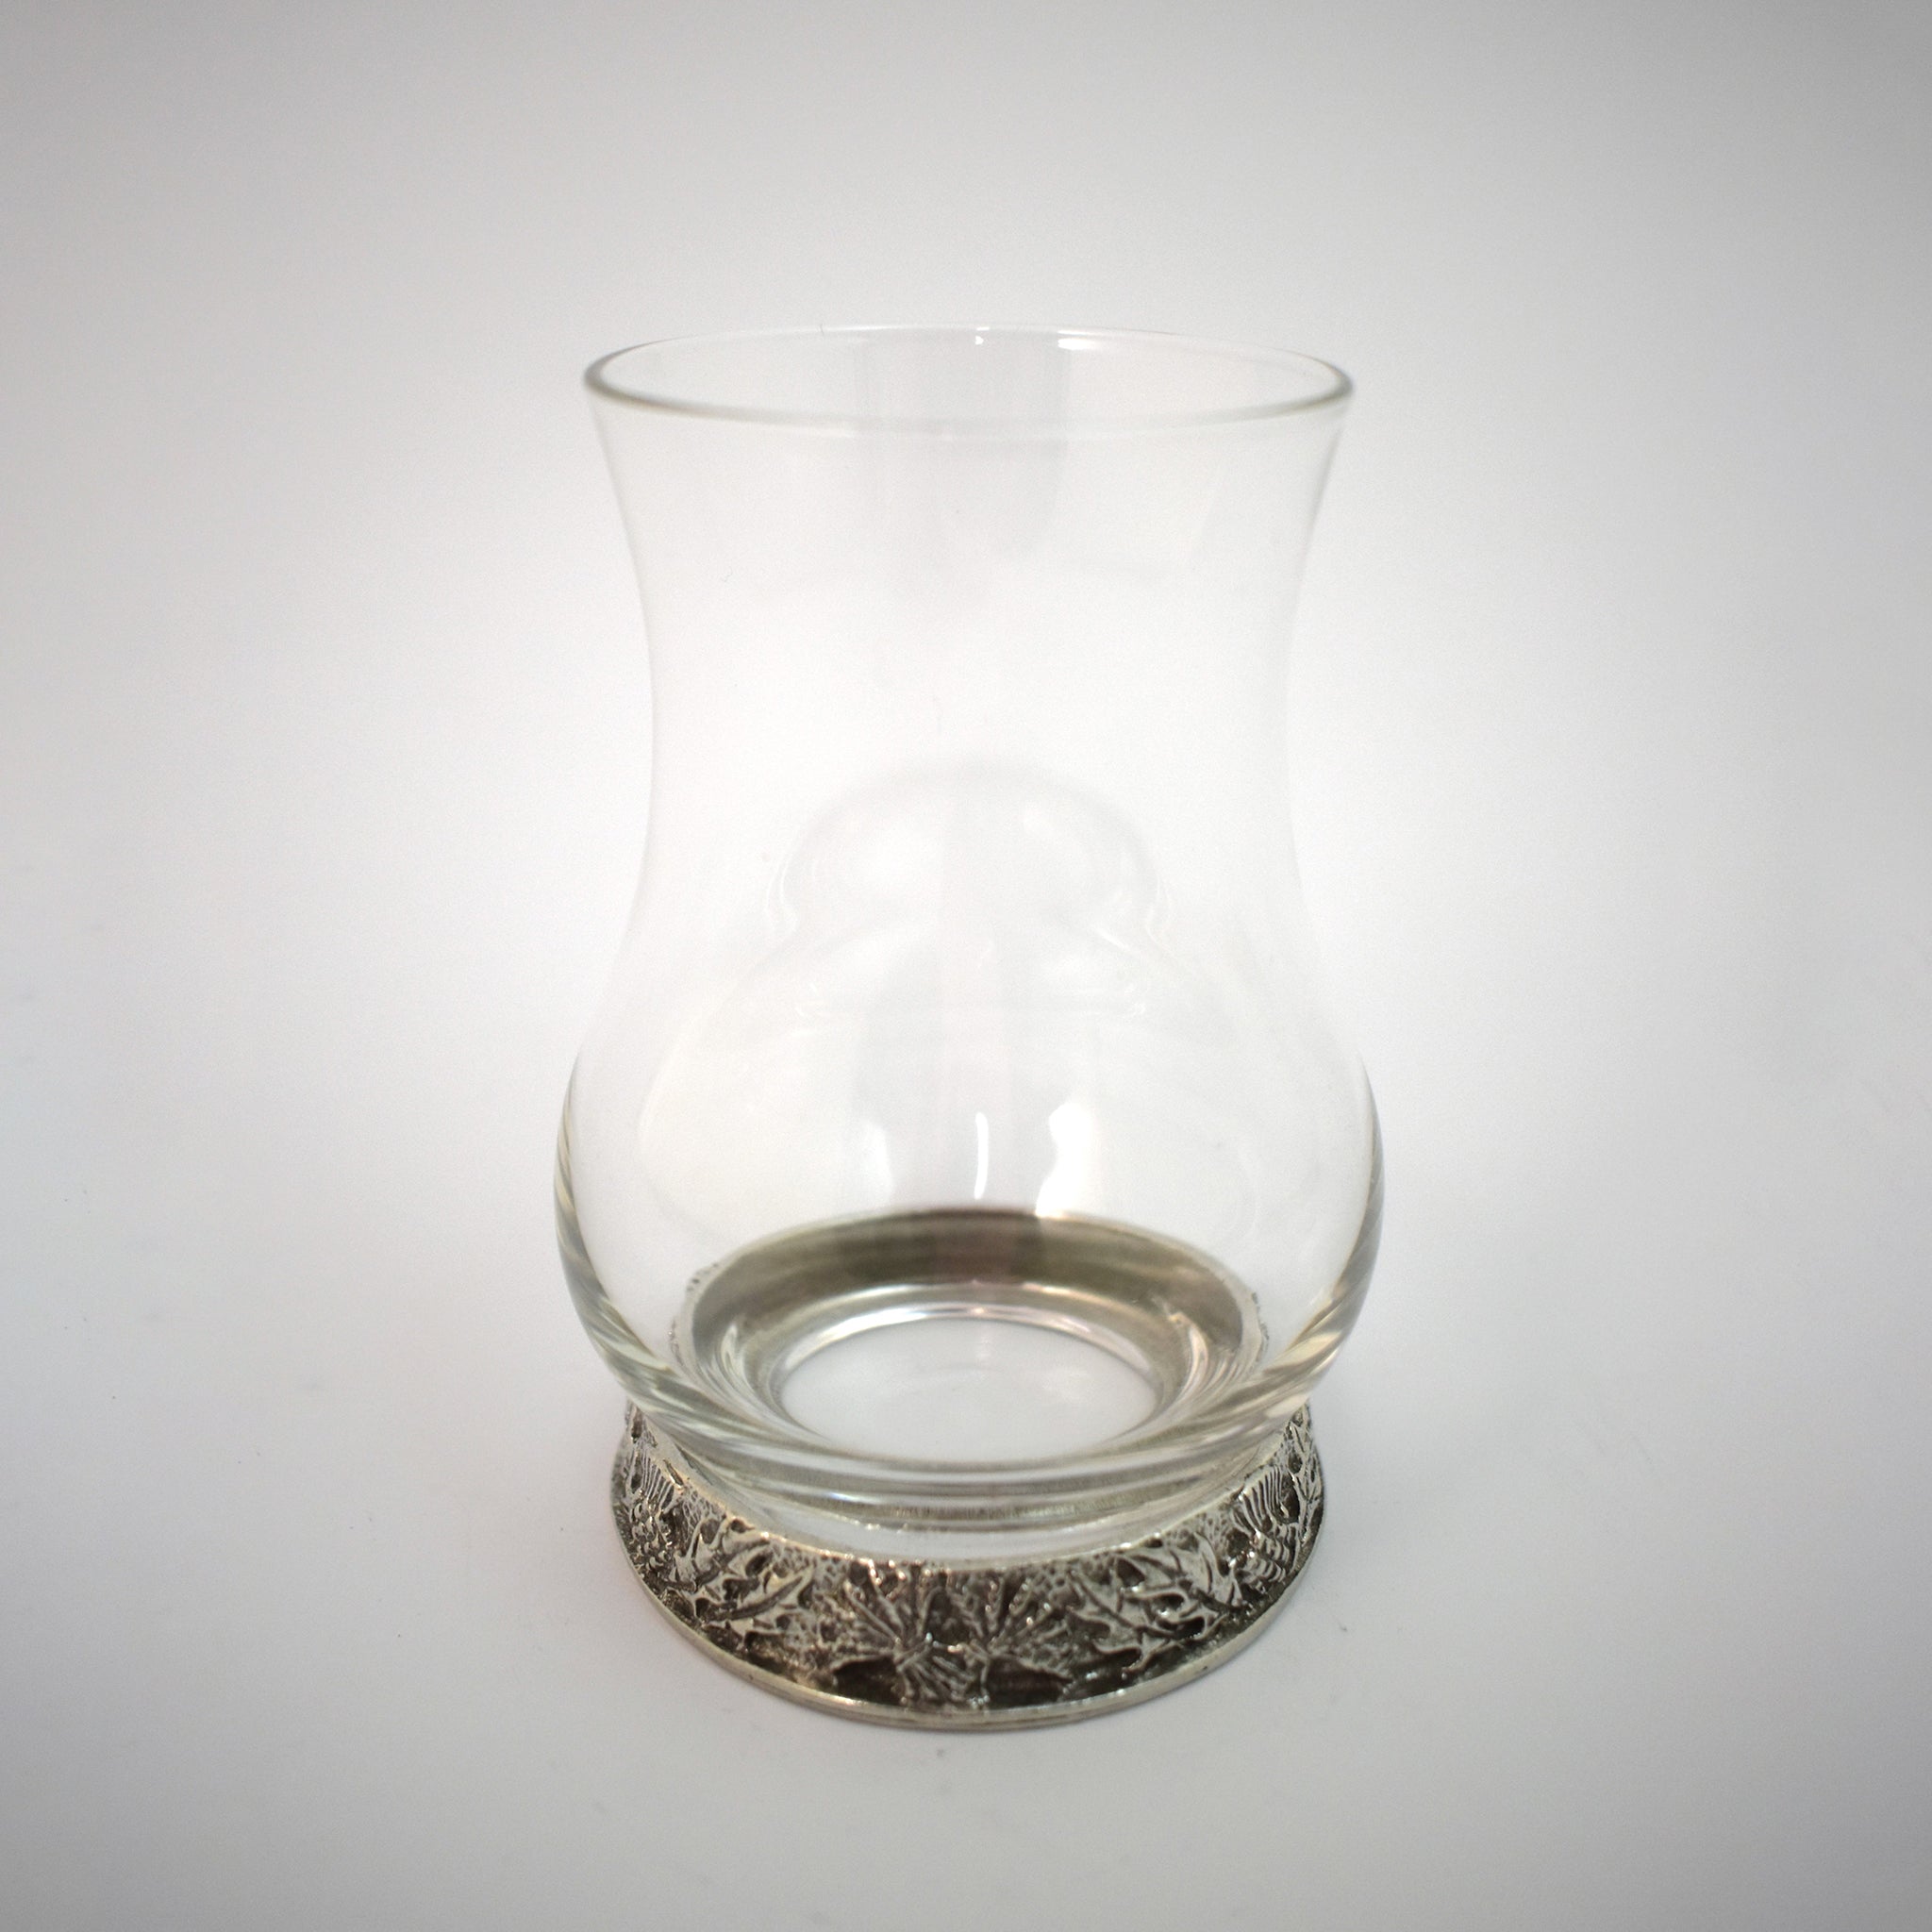 A whisky glass with a pewter base engraved with thistles